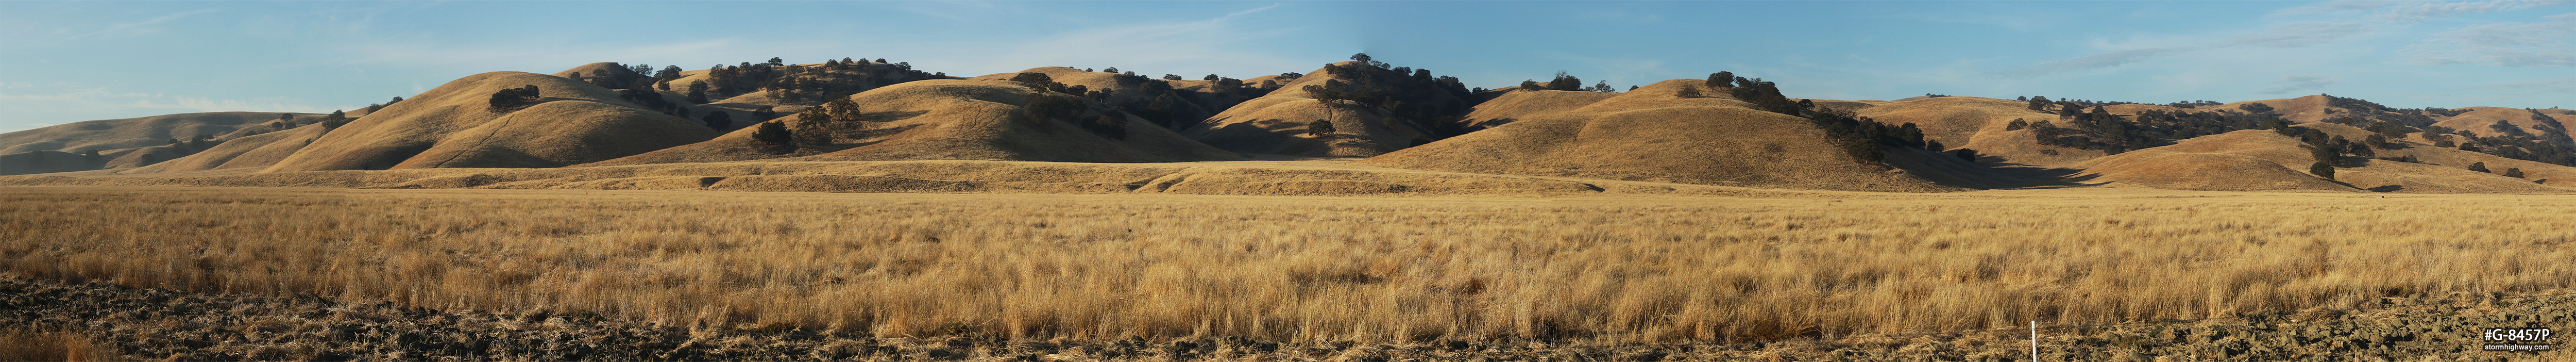 Hills and fields along the San Andreas Fault at Cholame, CA